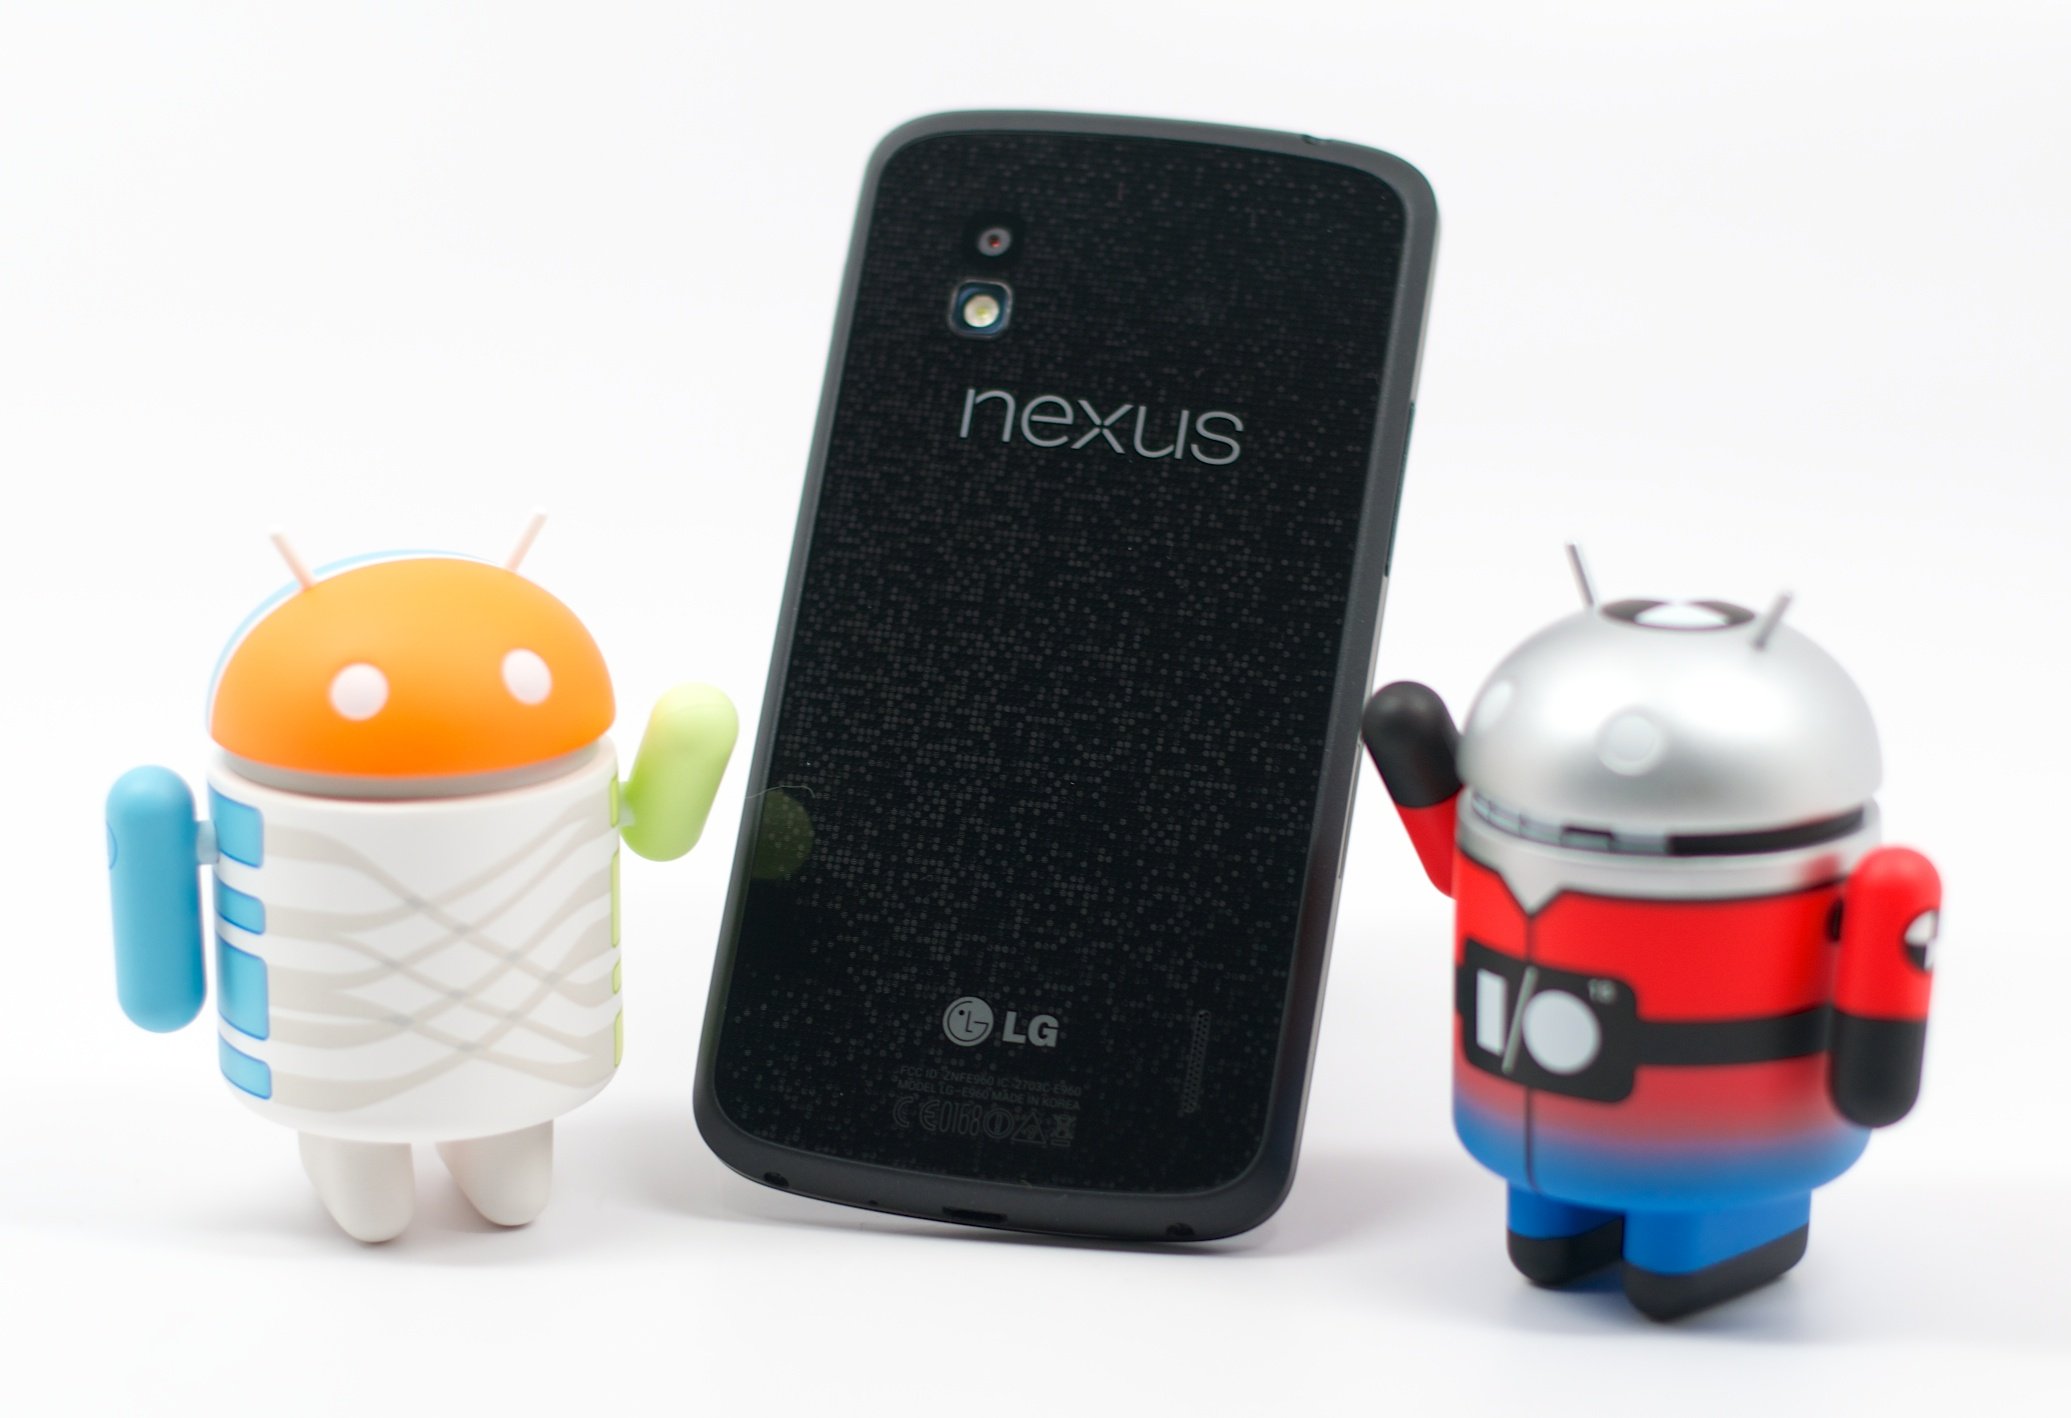 Google is committed to the Nexus program, giving hope for the Nexus 5 this fall.